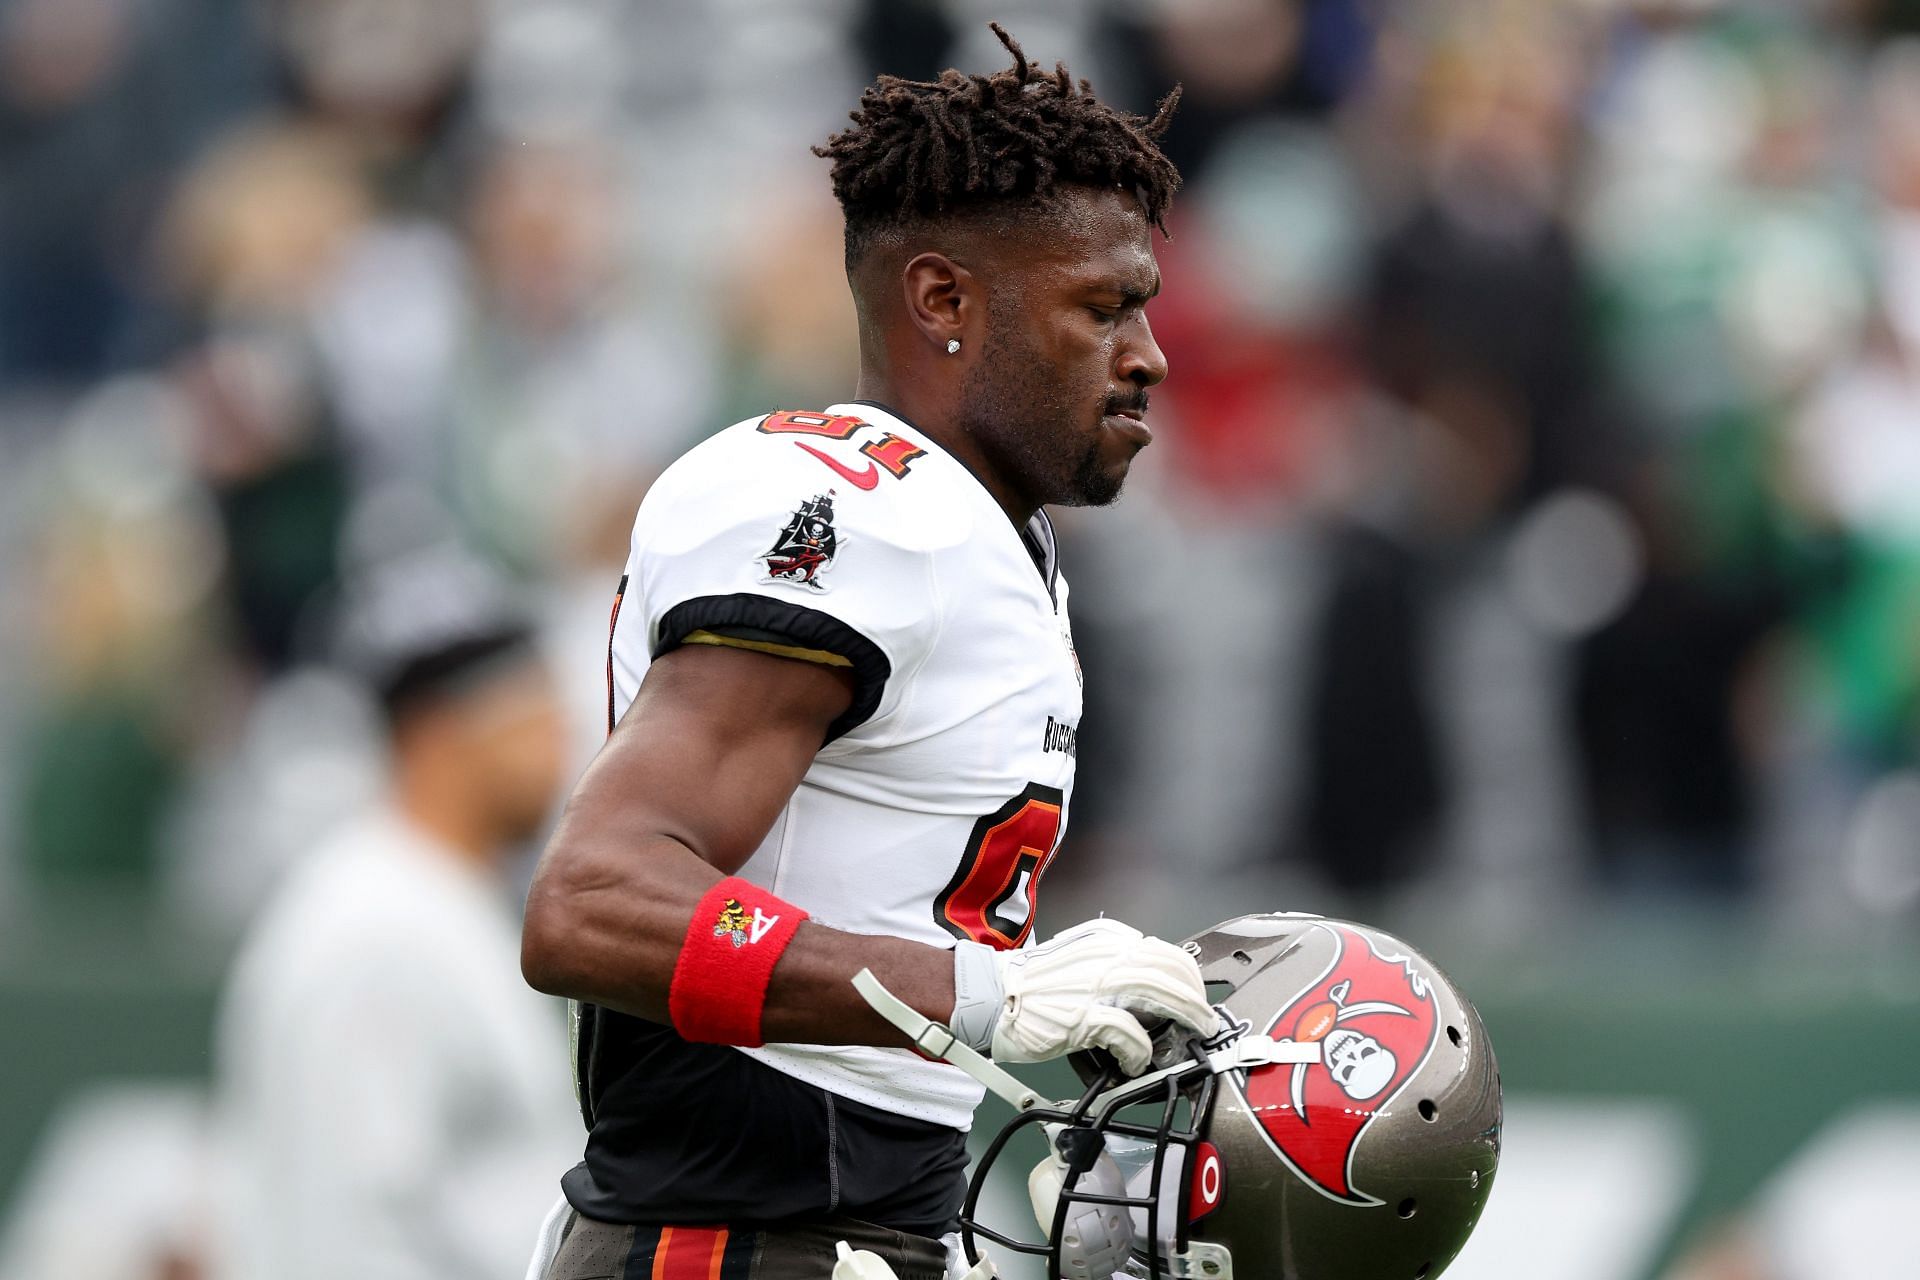 Antonio Brown seems to have run his course in Tampa Bay